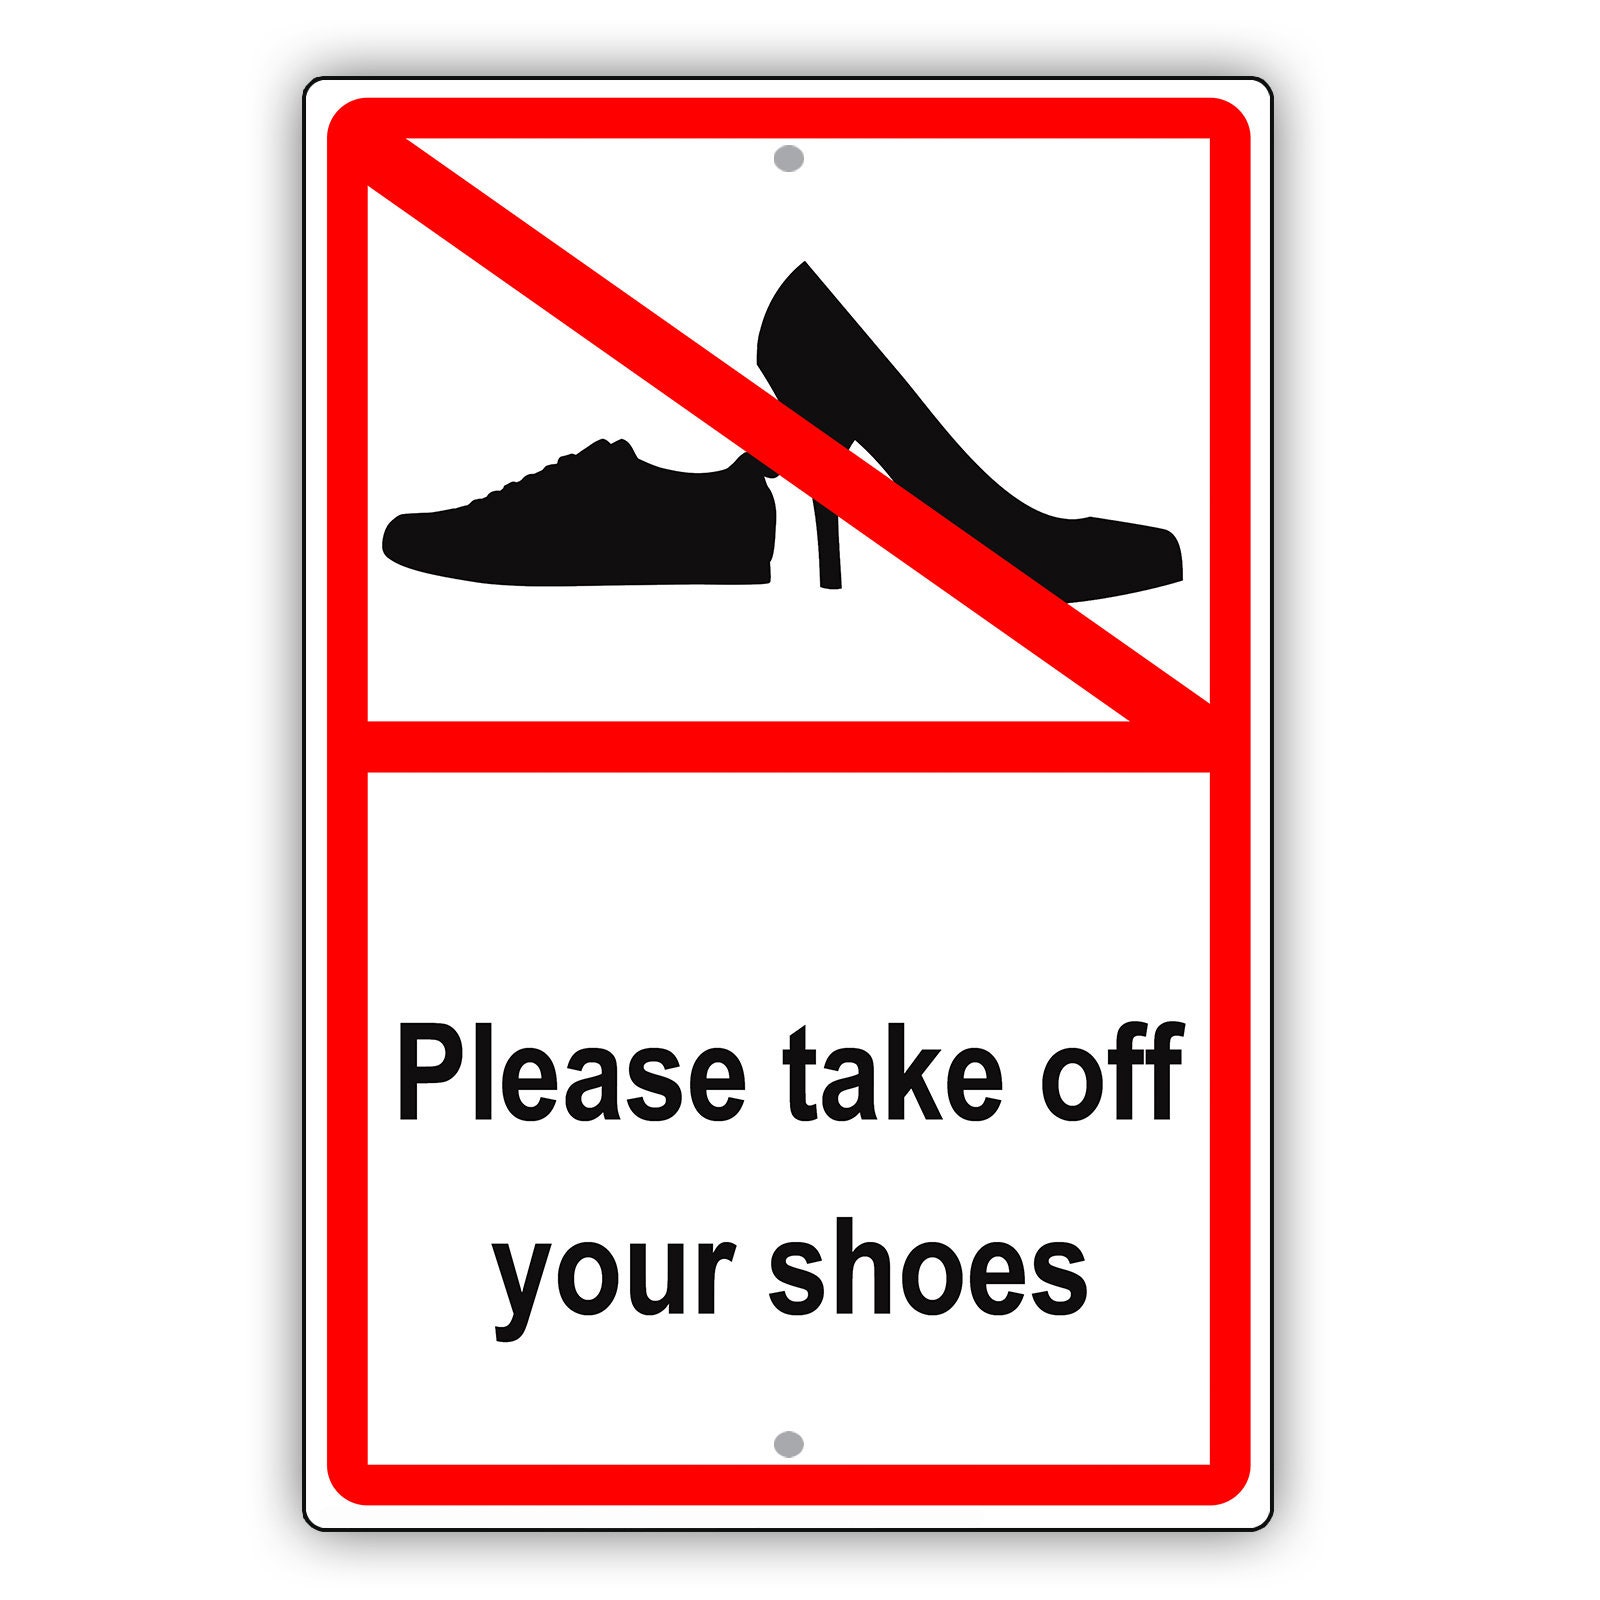 Please take off your Shoes. Take off Shoes. Take off картинка. Обувь off keep. Take off транскрипция